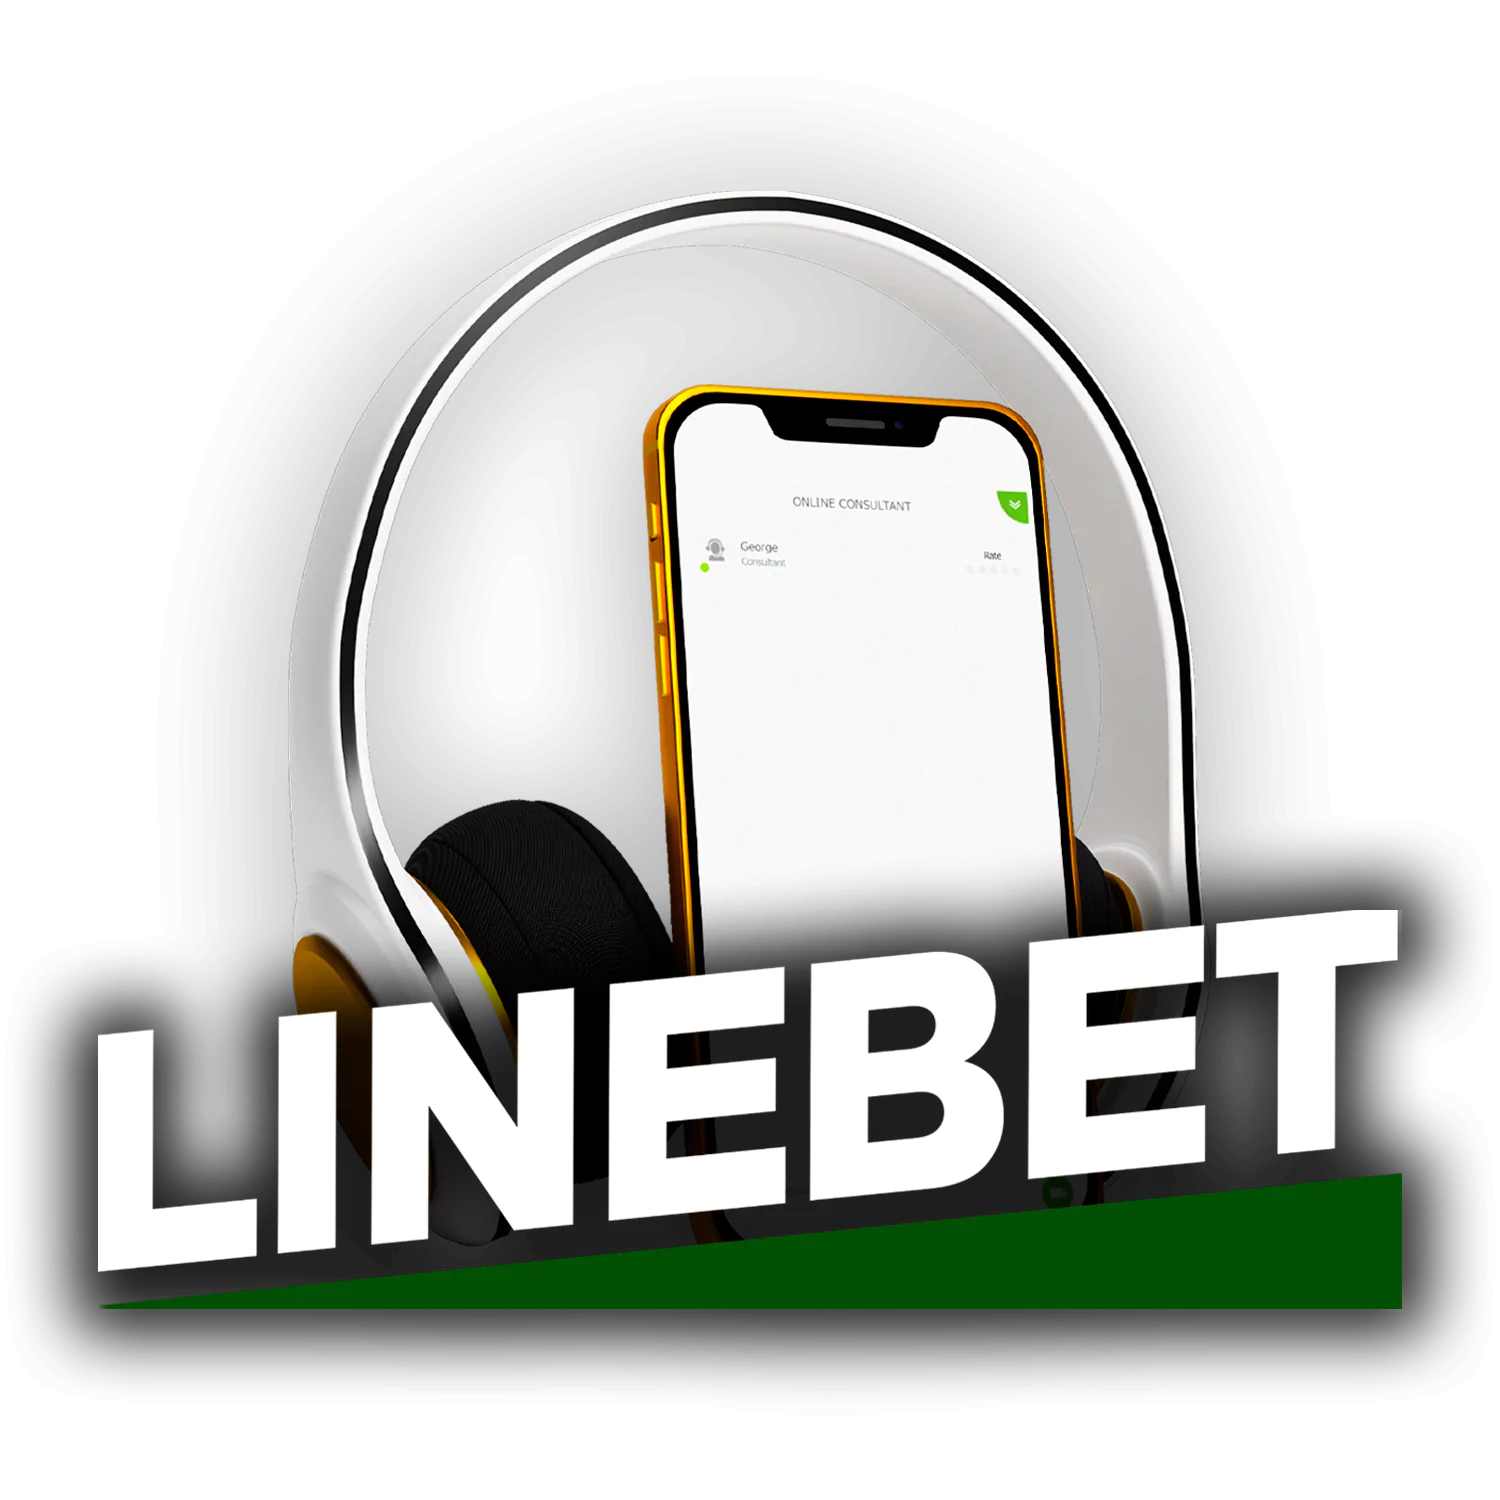 Linebet support service is available 24 hours a day.